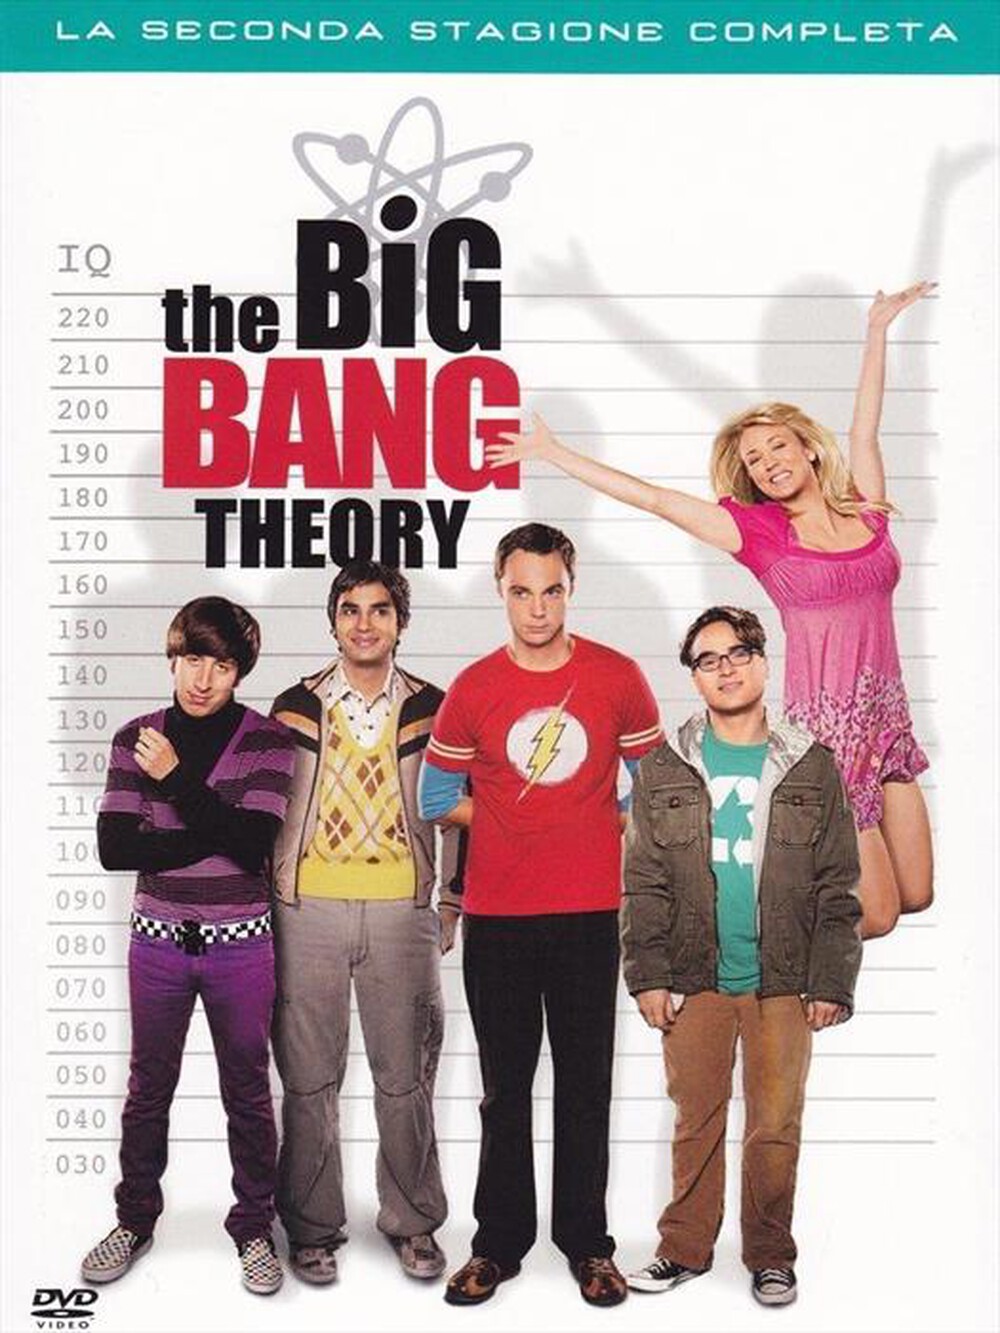 "WARNER HOME VIDEO - Big Bang Theory (The) - Stagione 02 (4 Dvd)"